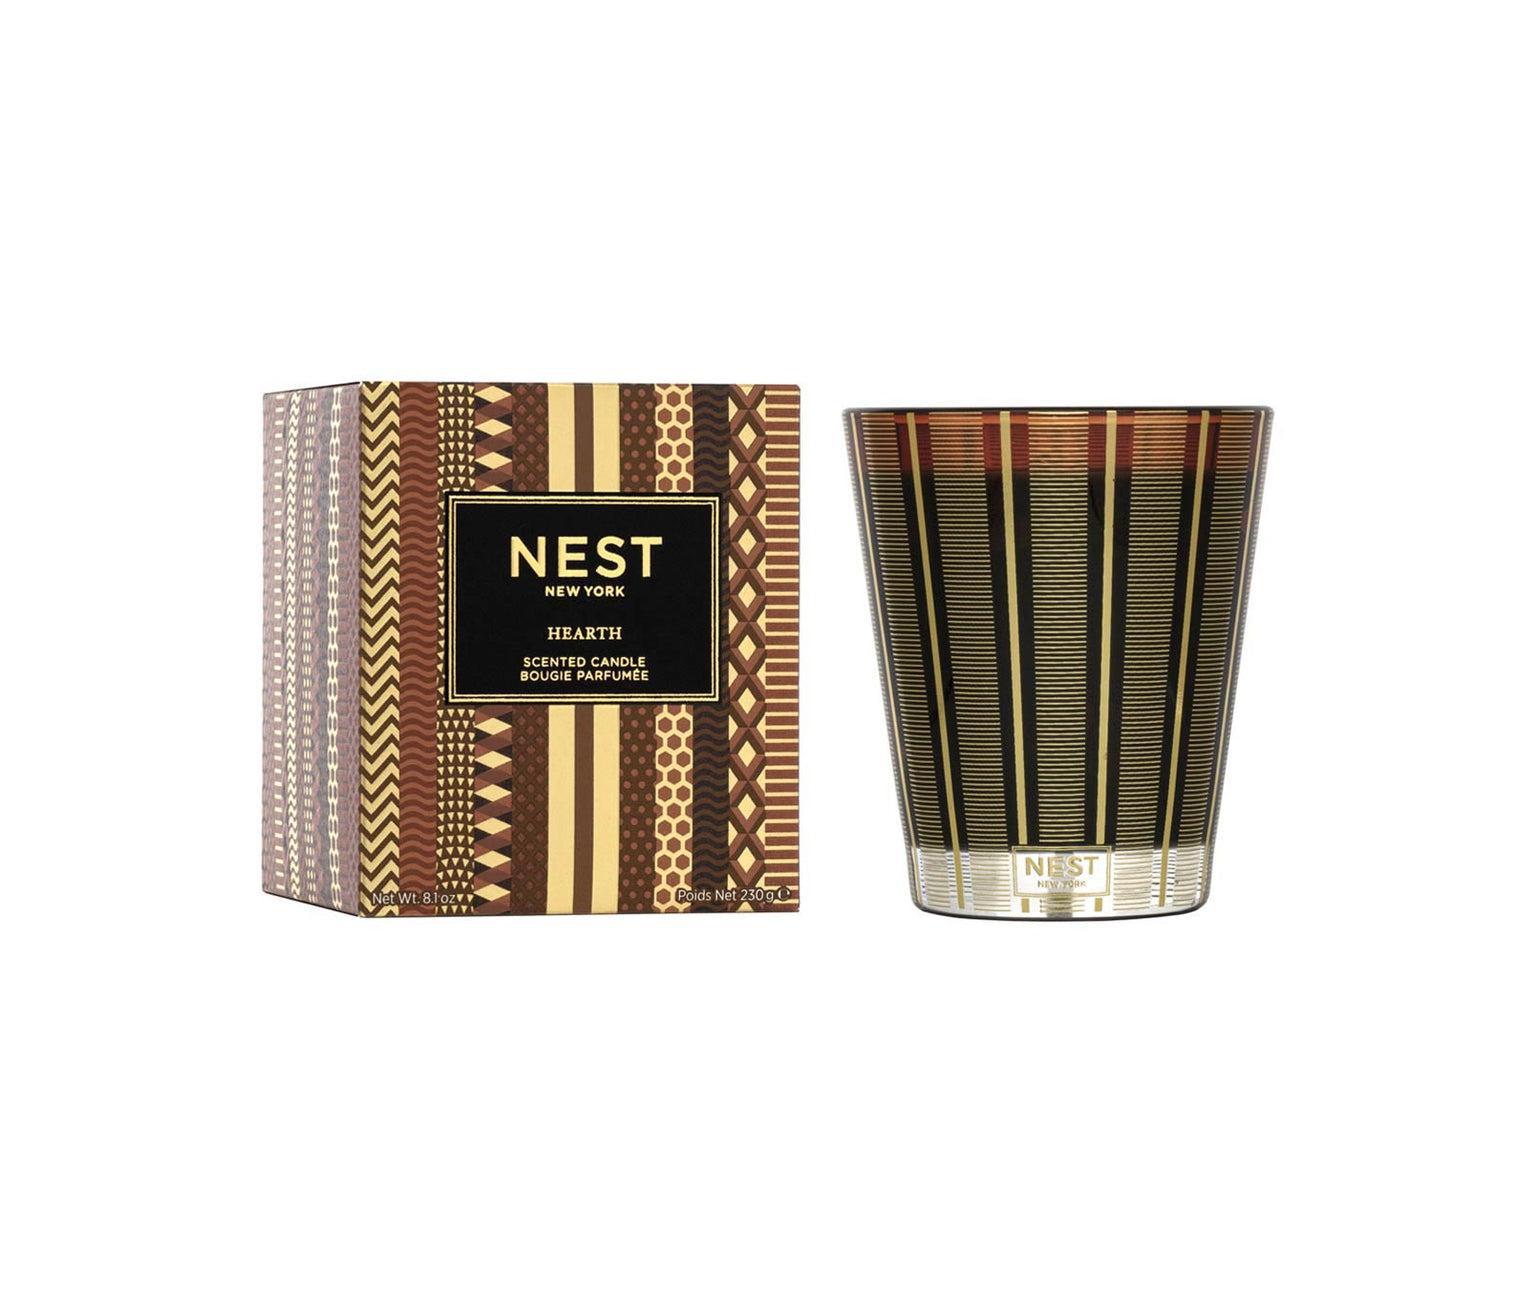 Nest Hearth Classic Candle